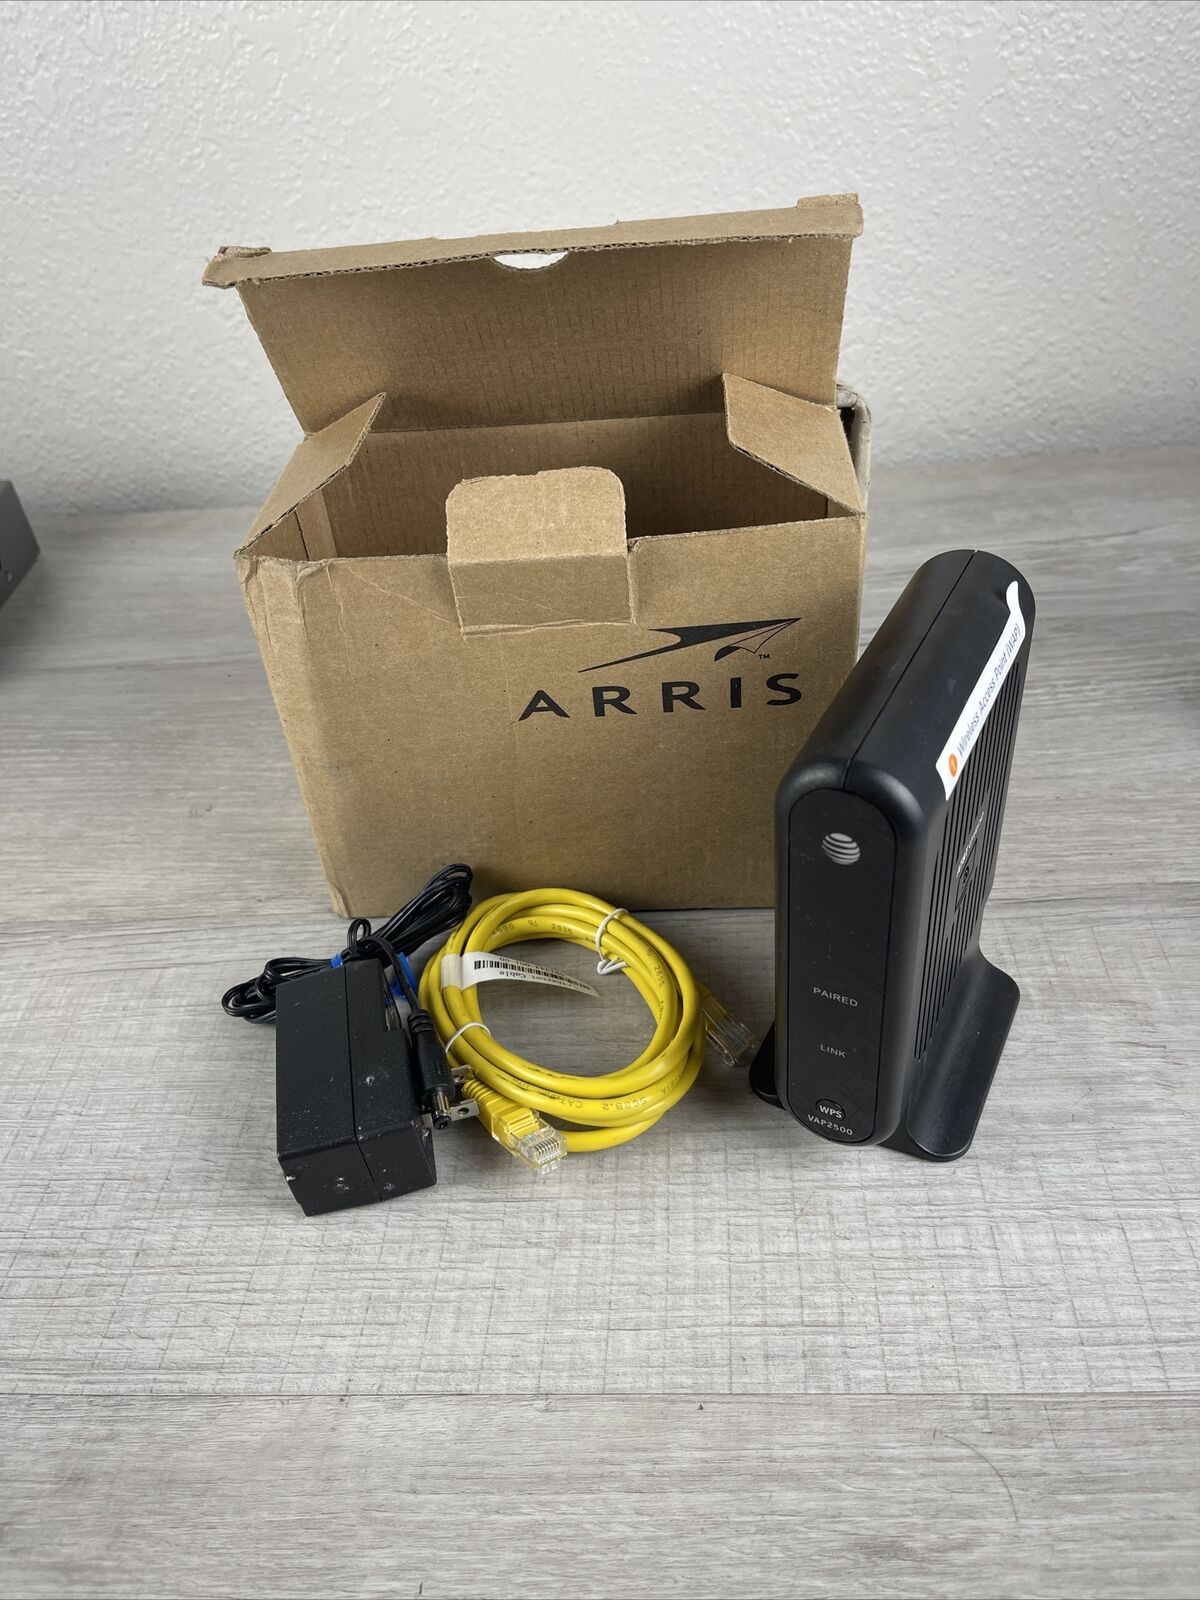 AT&T U-verse Wireless Access Point ARRIS Model #VAP2500 with Power Cord